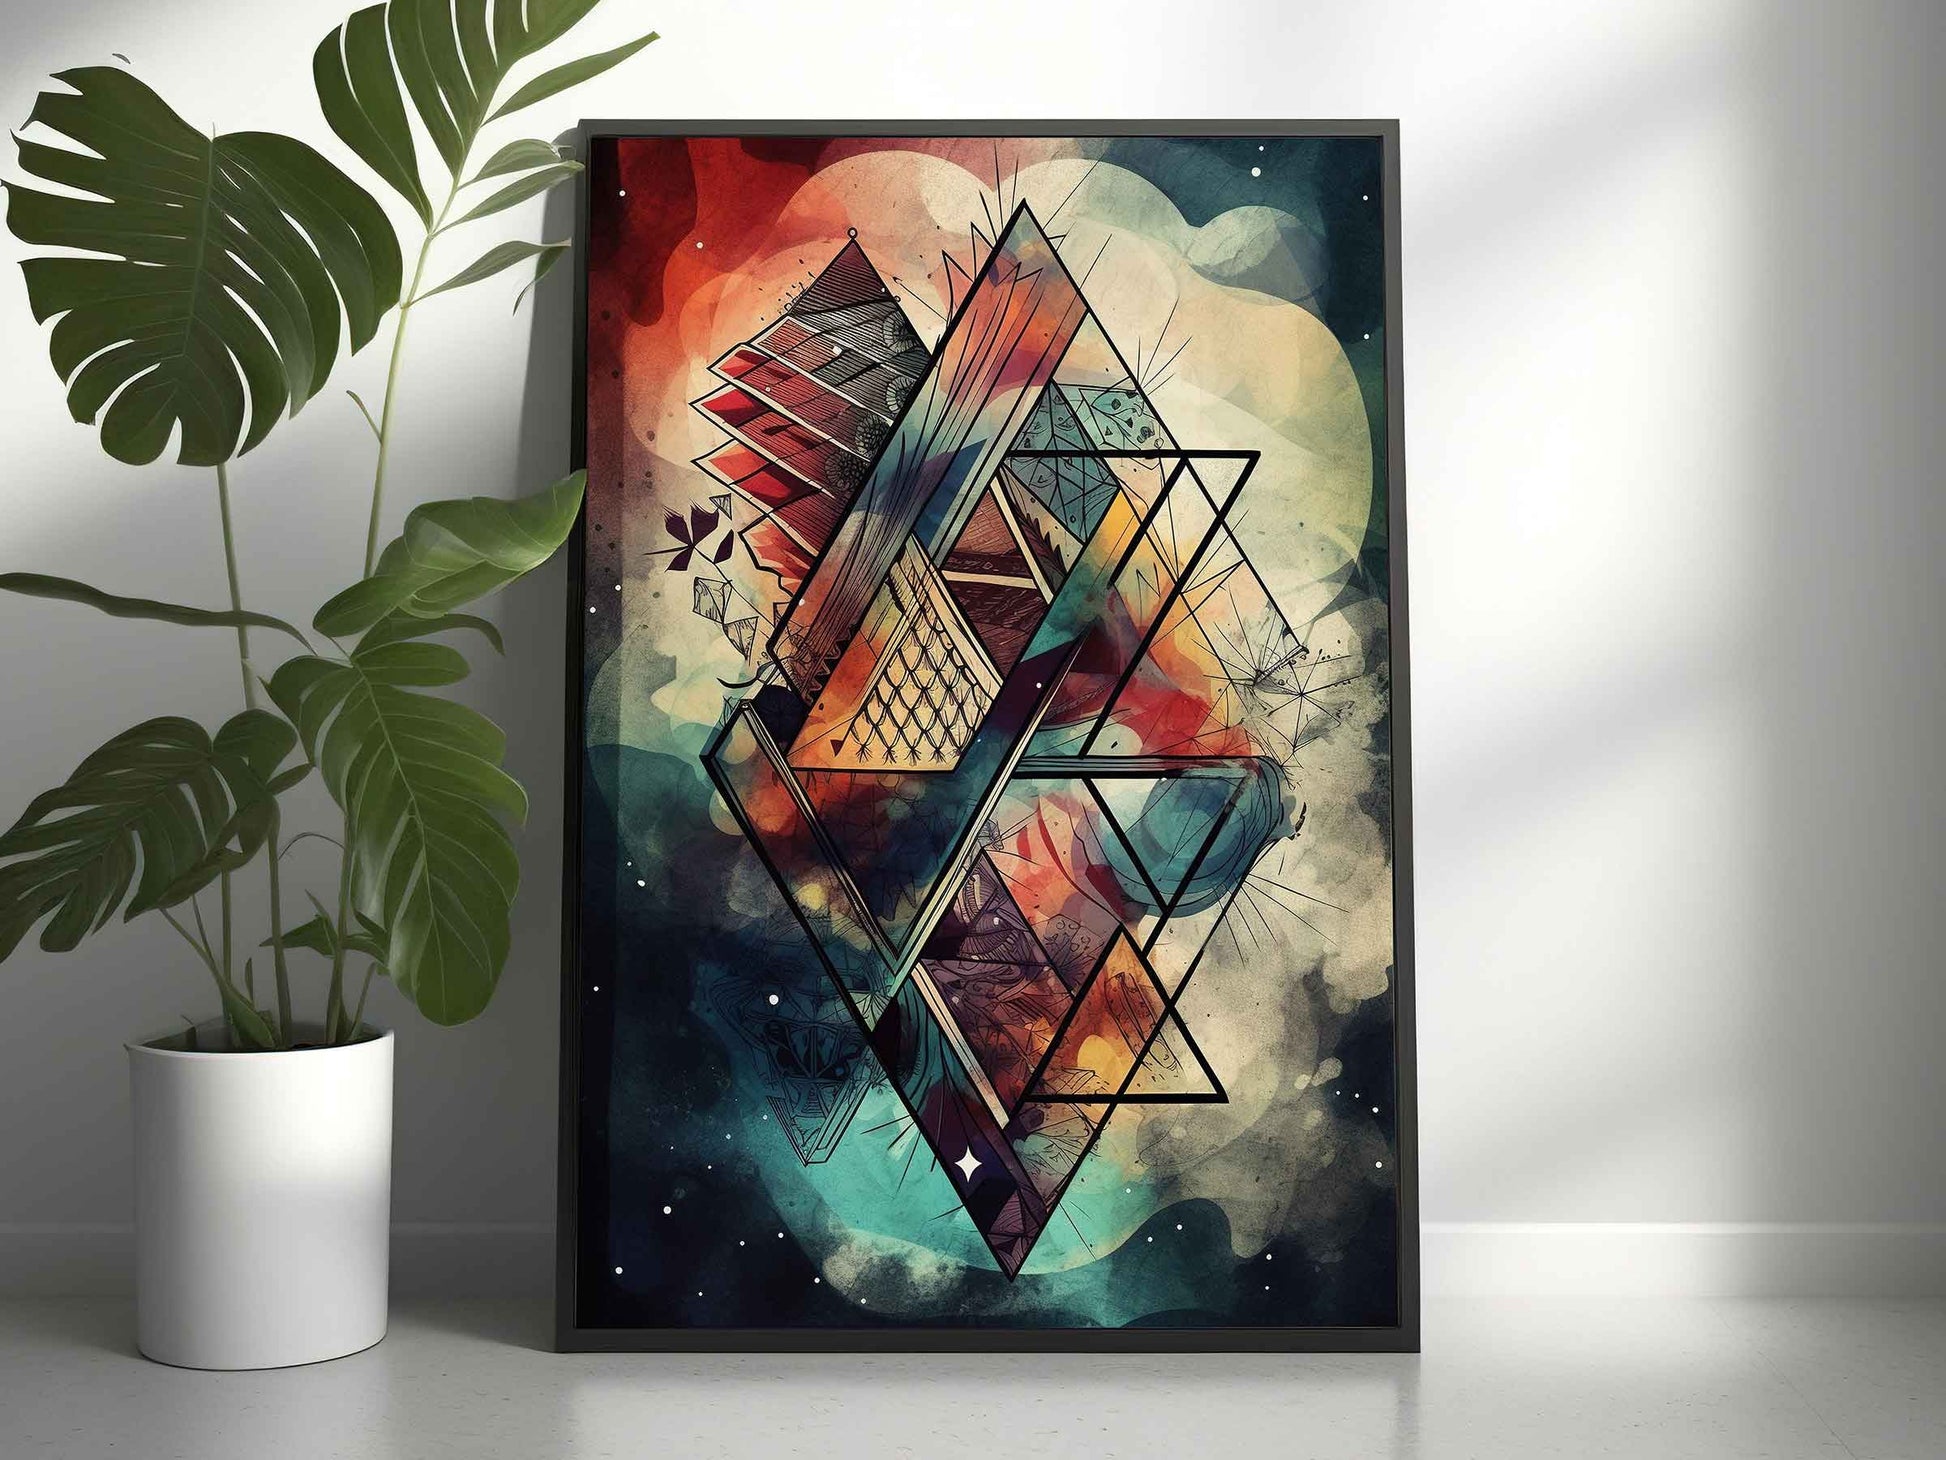 Framed Image of Boho Geometric Aztec Tribal Abstract Style Wall Art Poster Prints